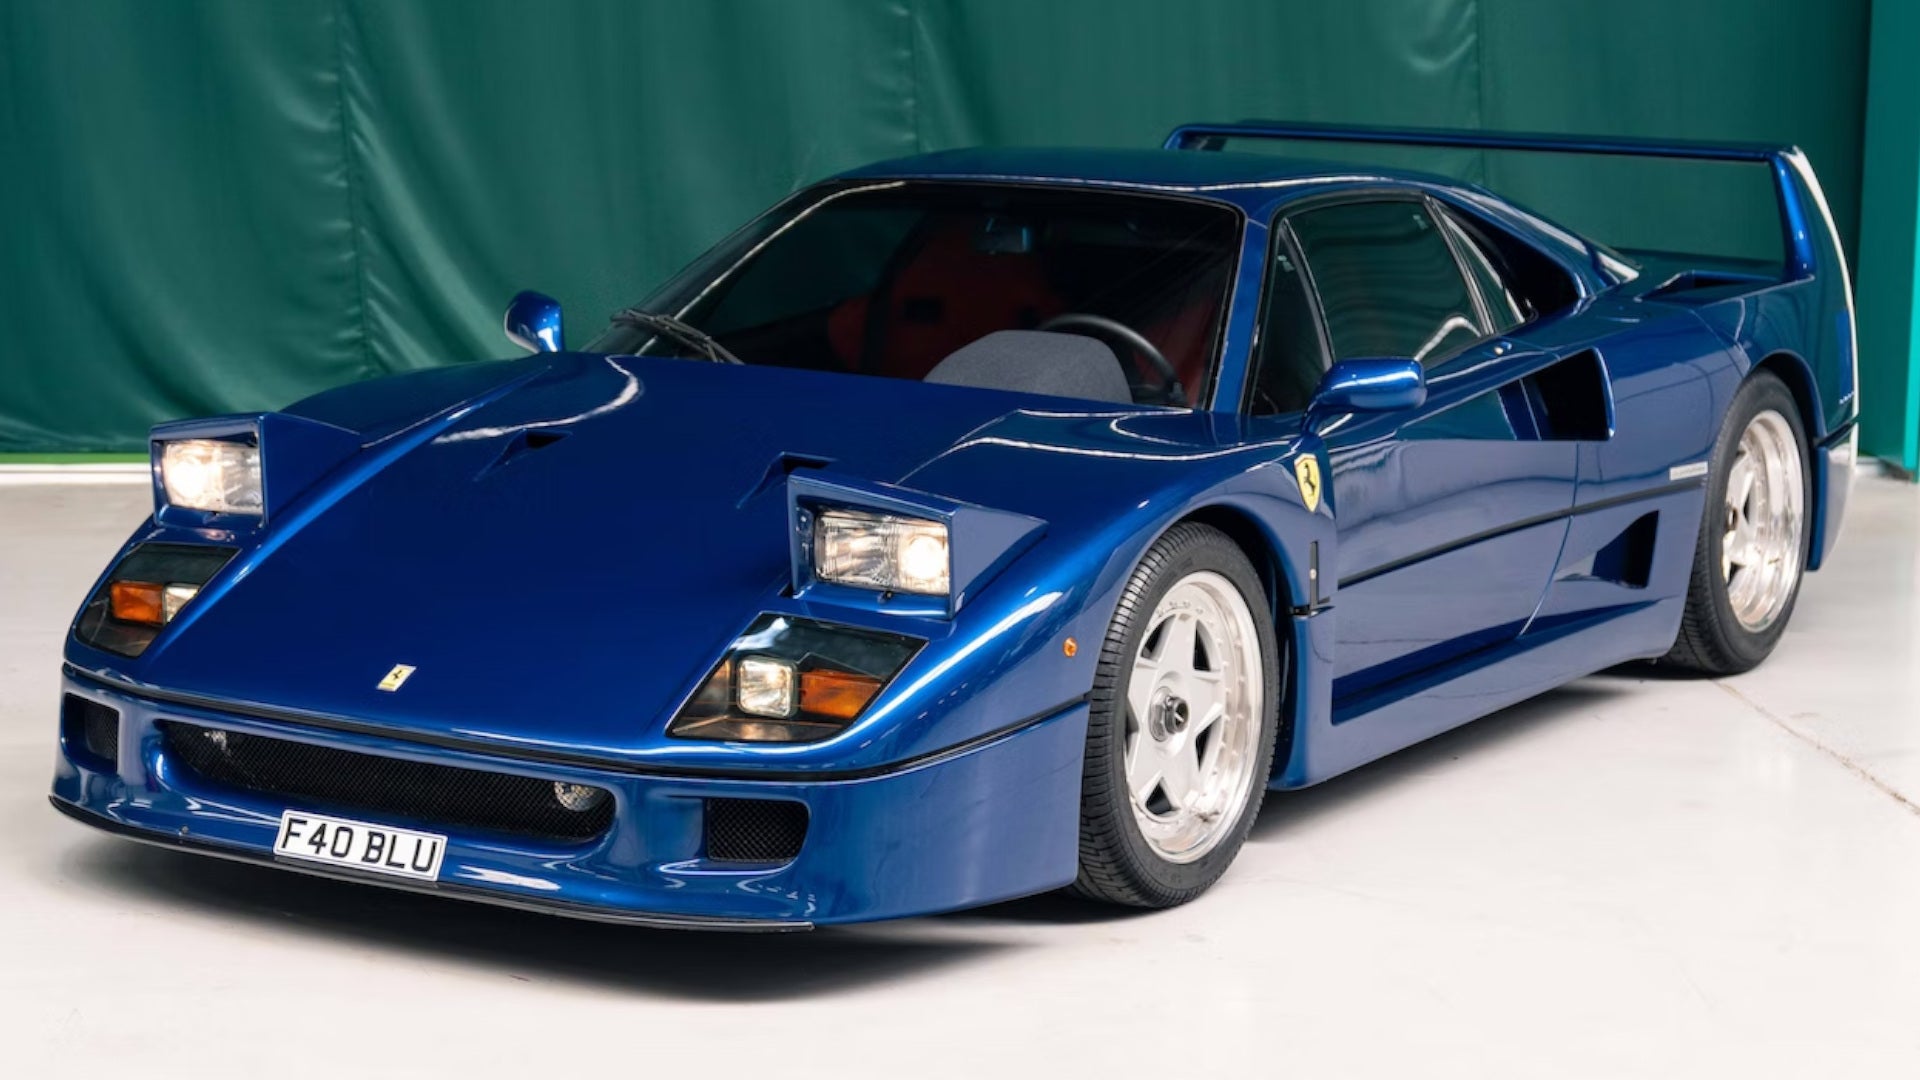 Ferrari F40 Tribute Is Stunning From All Angles